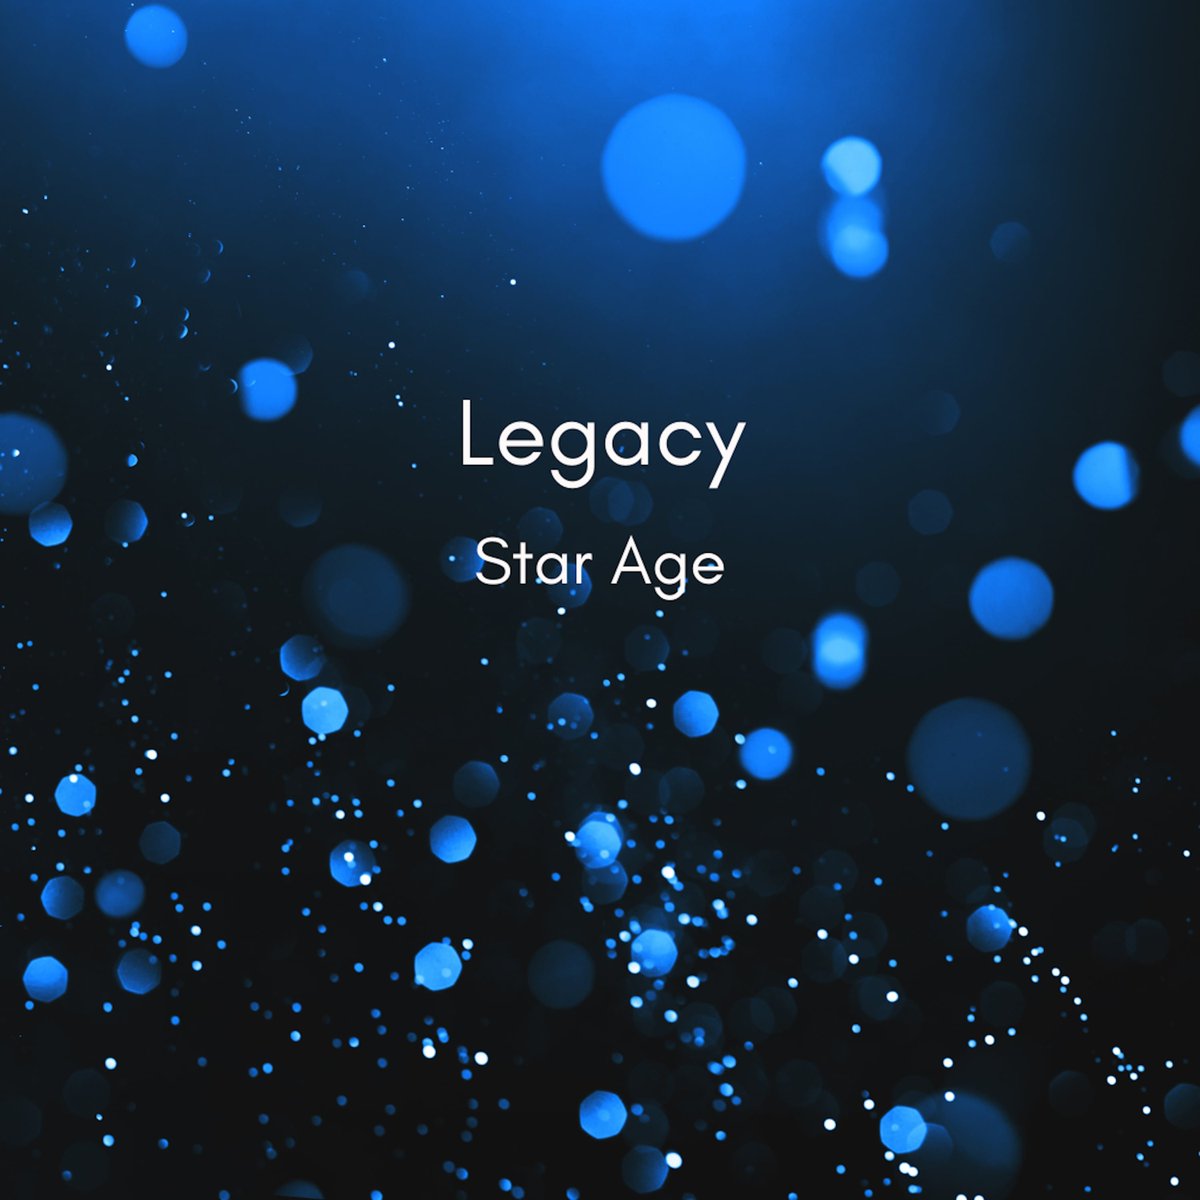 Releasing TONIGHT at midnight, wherever you are in the world. A tribute to my late Mother, who left me an indelible musical legacy. Pre-save now: gyro.to/127503Legacy #legacy #piano #pianist #pianomusic #newmusic #newmusicalert #presave #staragemusic #modernclassical